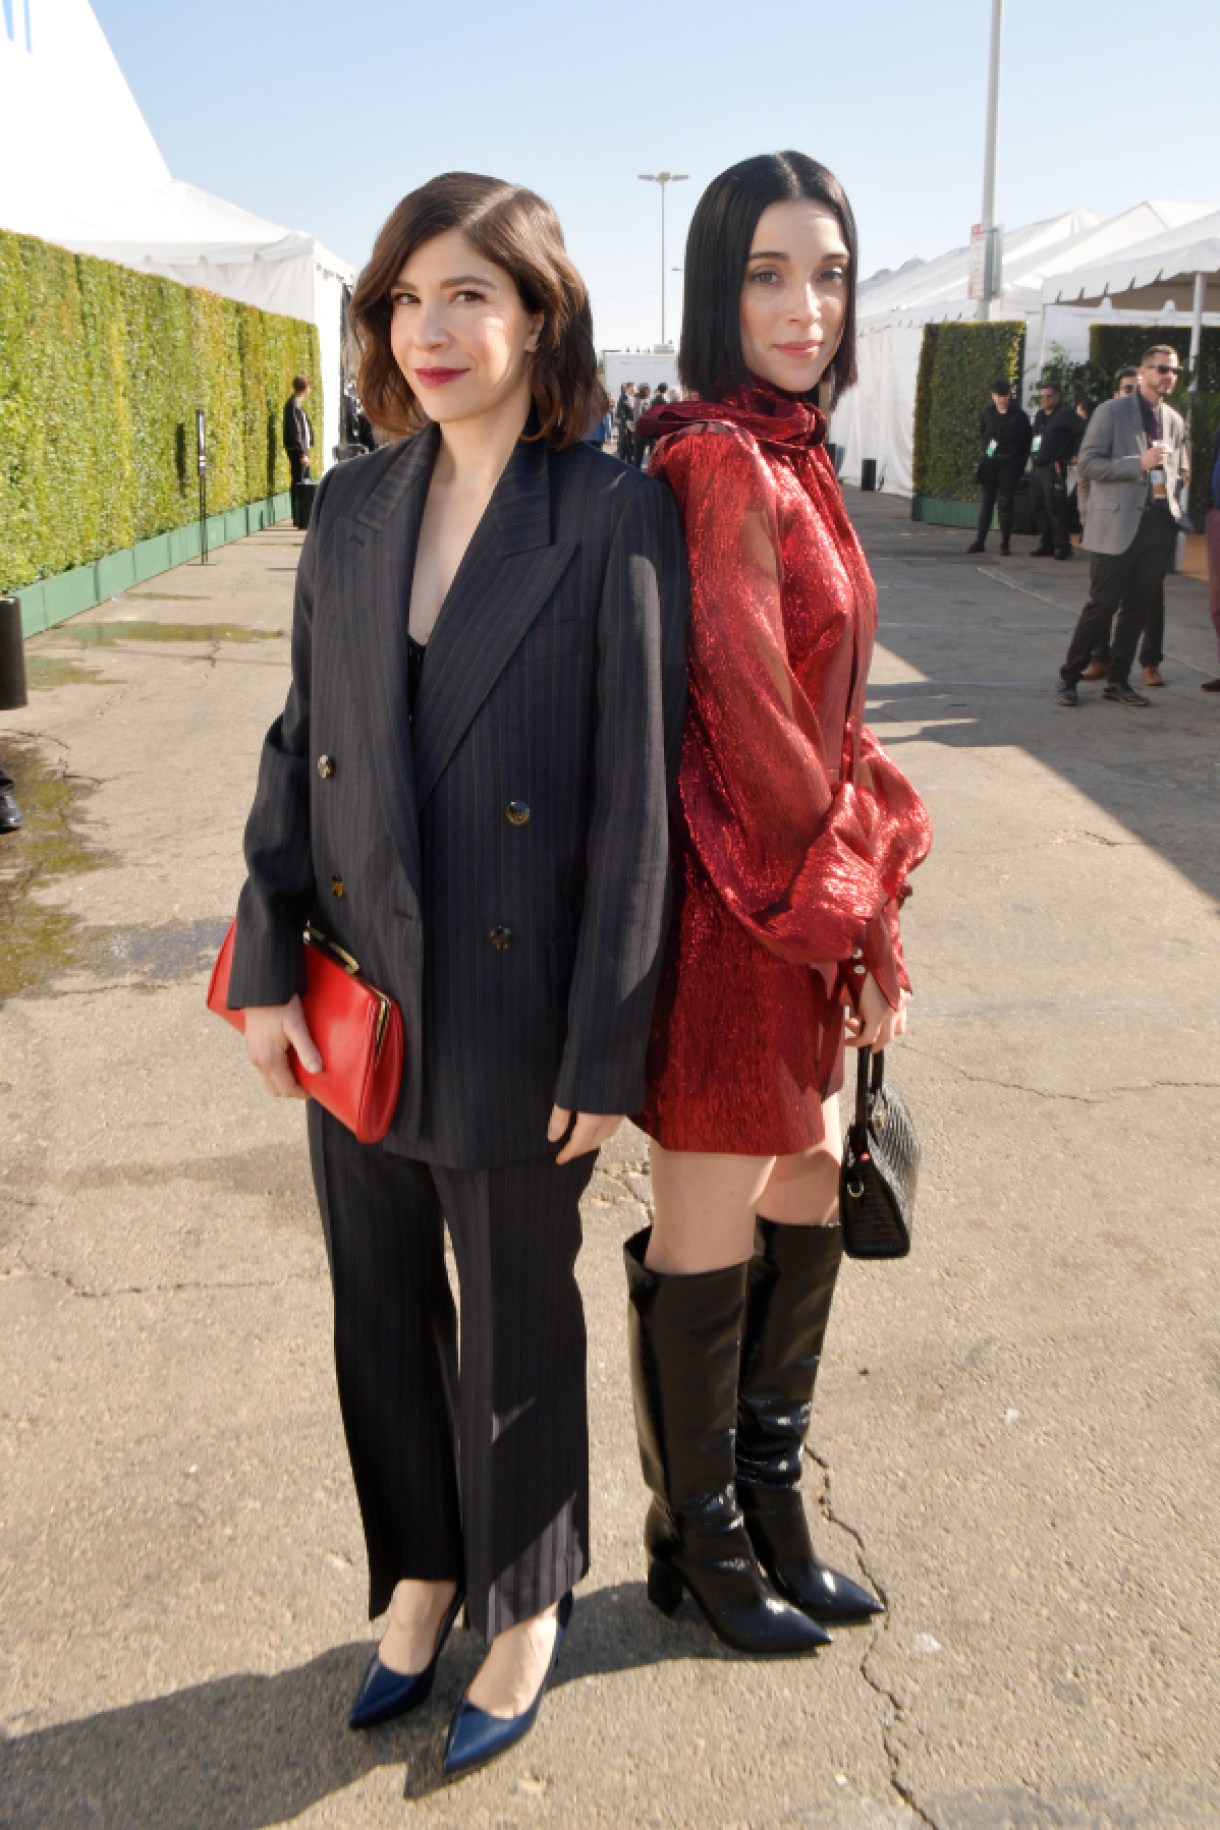 SANTA MONICA, CALIFORNIA - FEBRUARY 08: (L-R) Carrie Brownstein and St. Vincent attend the 2020 Film Independent Spirit Awards on February 08, 2020 in Santa Monica, California. (Photo by Matt Winkelmeyer/Getty Images)